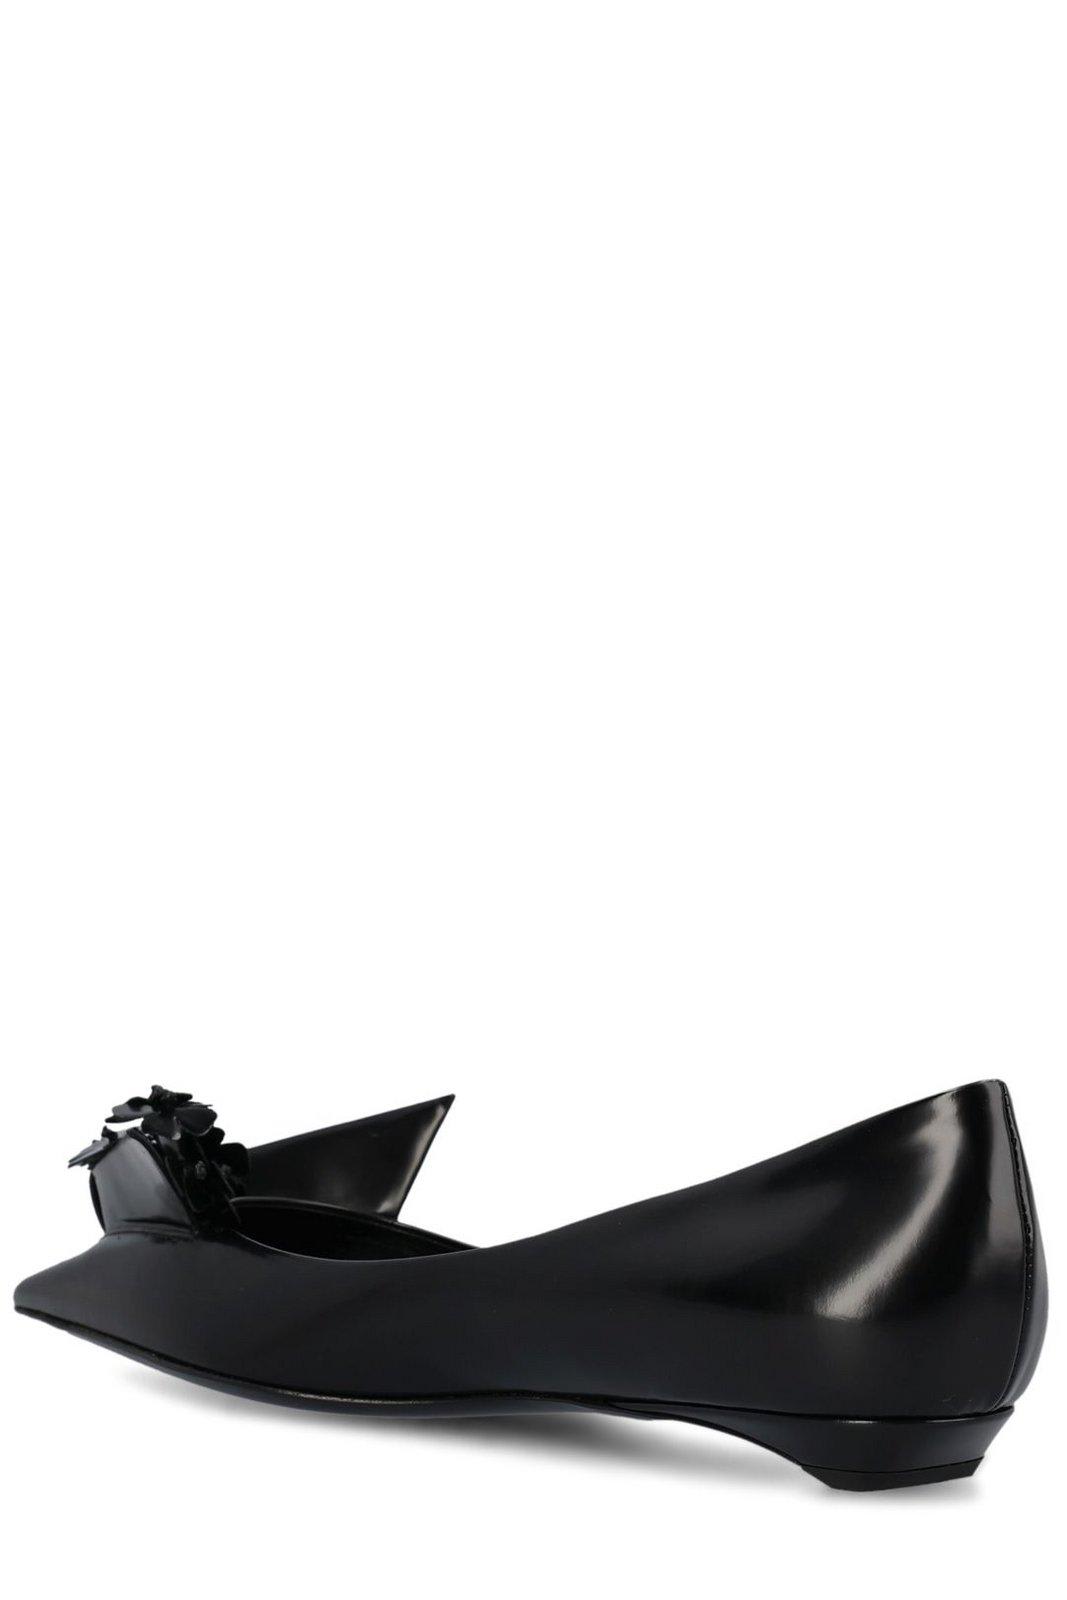 Shop Prada Pointed-toe Flat Shoes In Nero